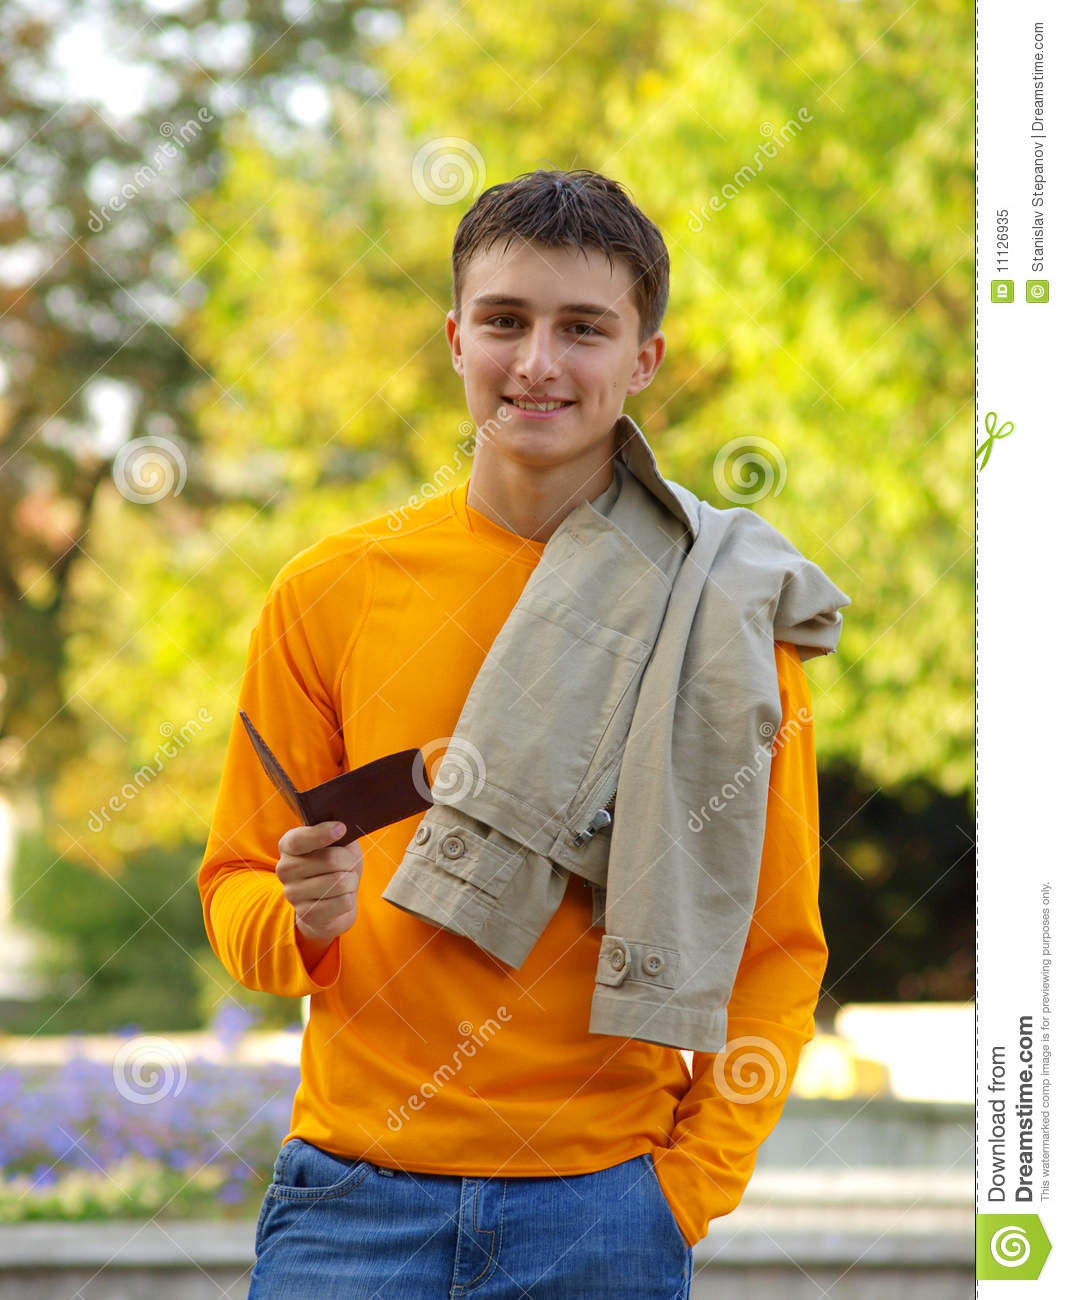 Handsome Yuong Man With Wallet Royalty Free Stock Photo   Image    